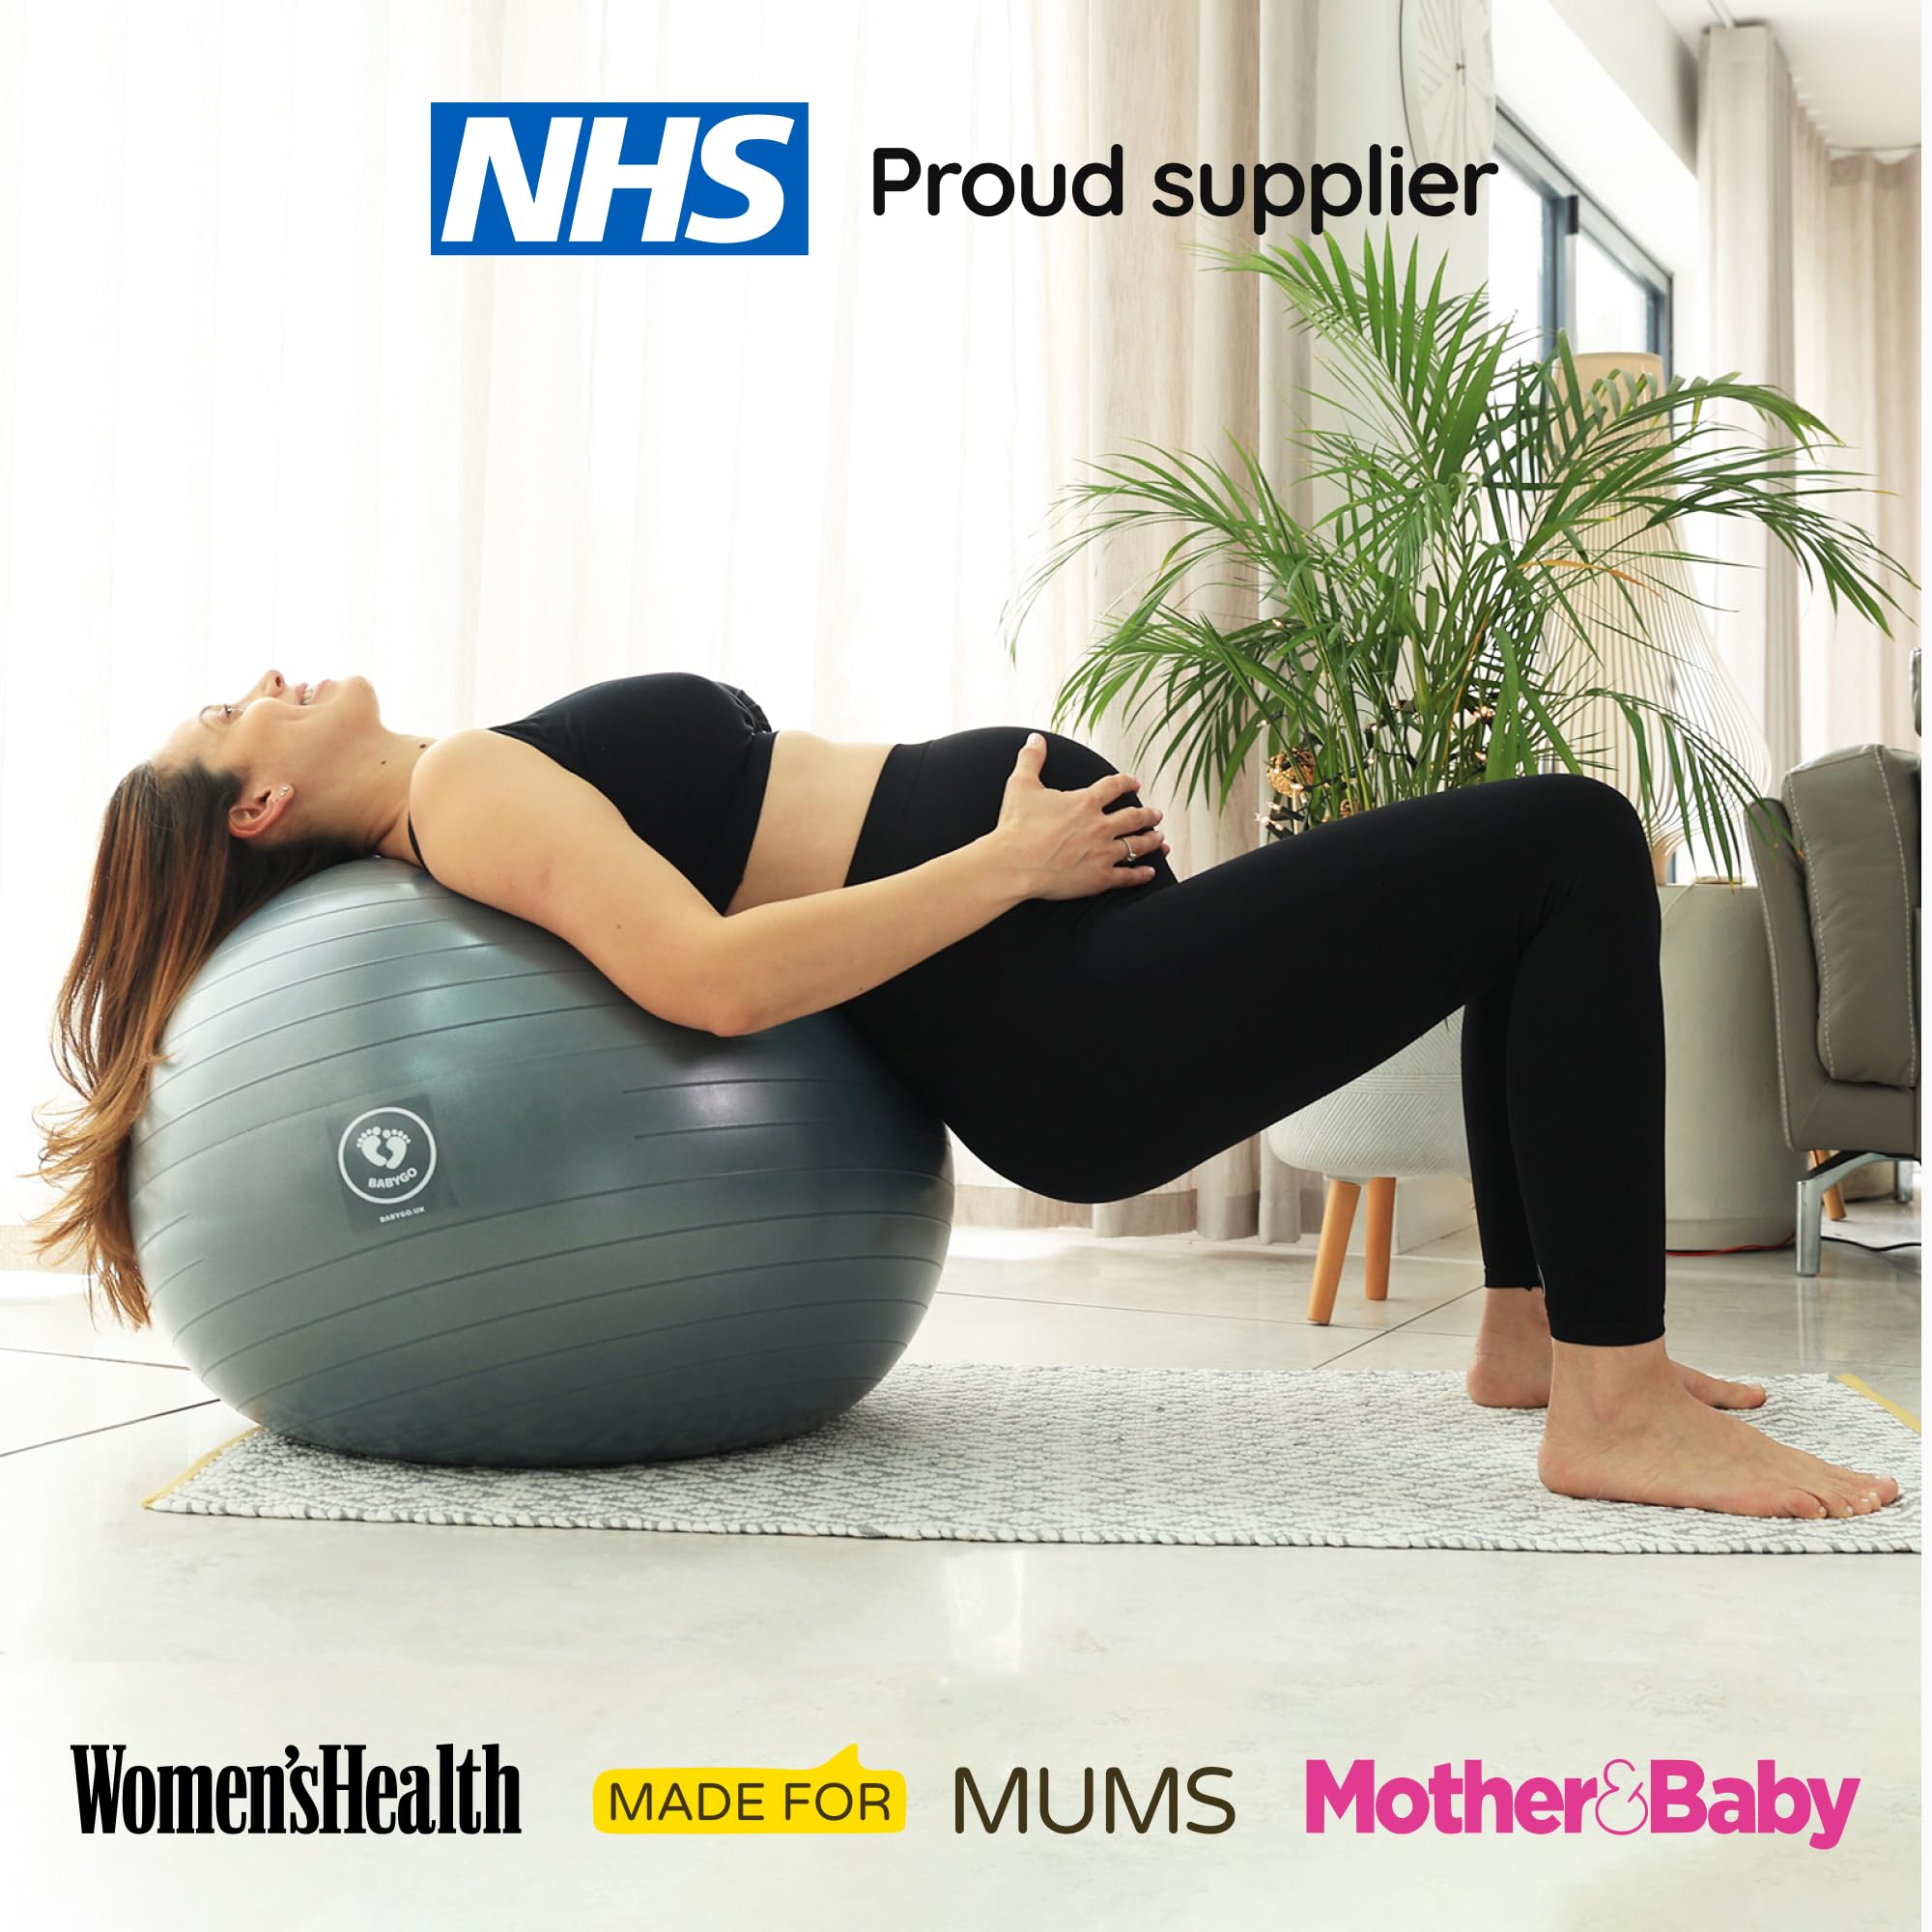 BABYGO® Birthing Ball For Pregnancy Maternity Labour & Yoga and Our 100 Page Pregnancy Book, Exercise, Birth & Recovery Plan, Anti-Burst Eco Friendly Material (75cm - 5'11 inches and, Grey)